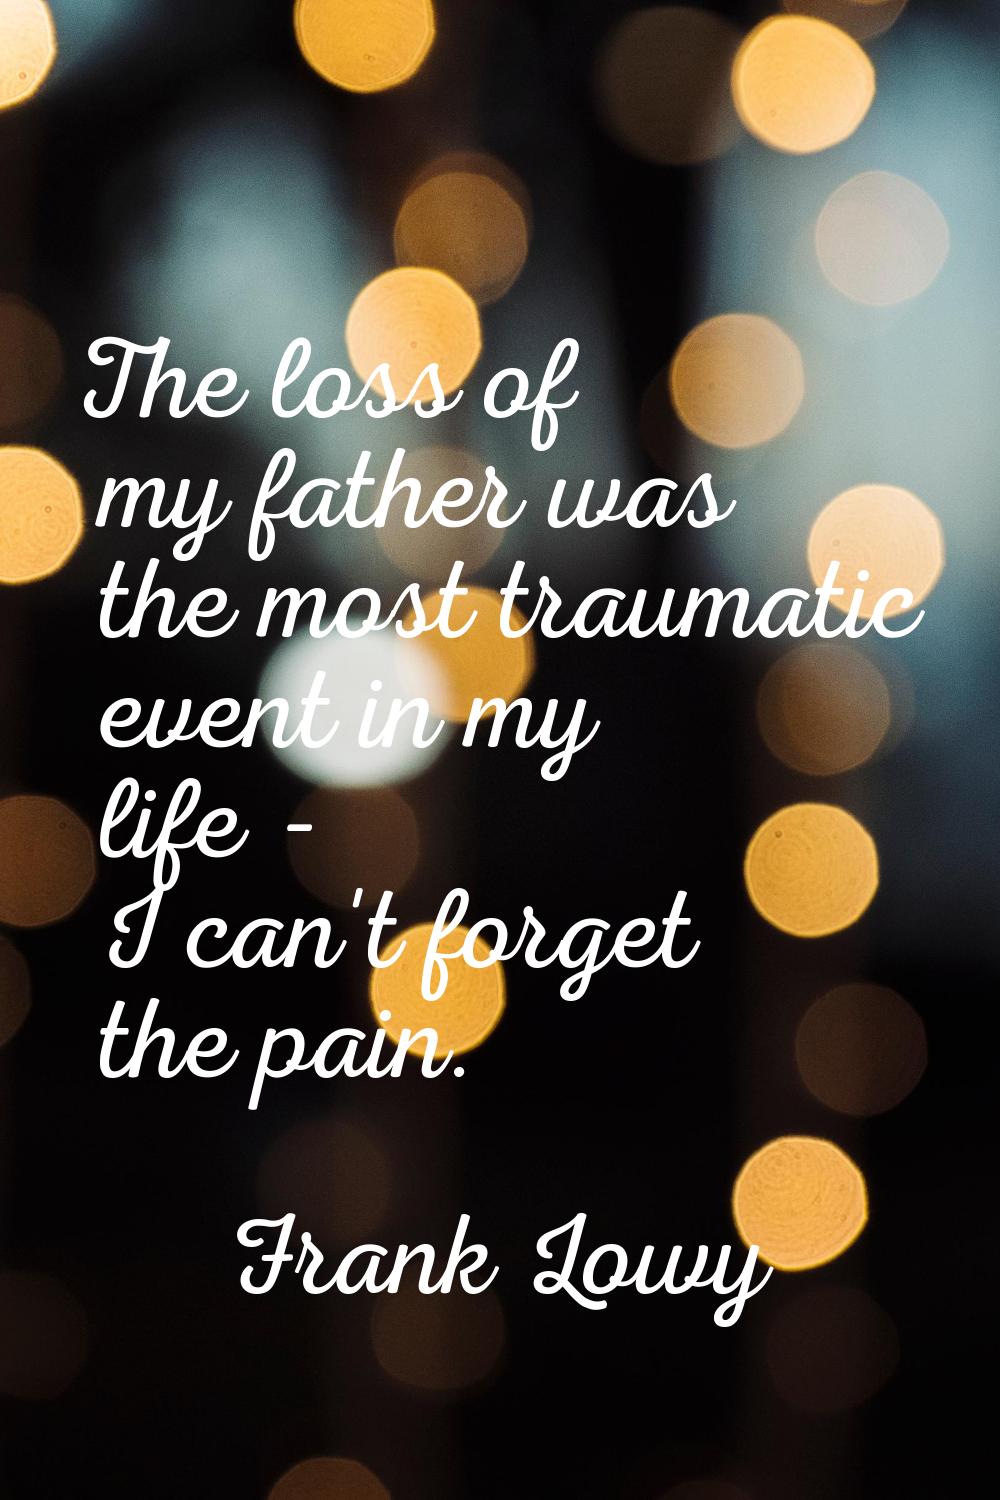 The loss of my father was the most traumatic event in my life - I can't forget the pain.